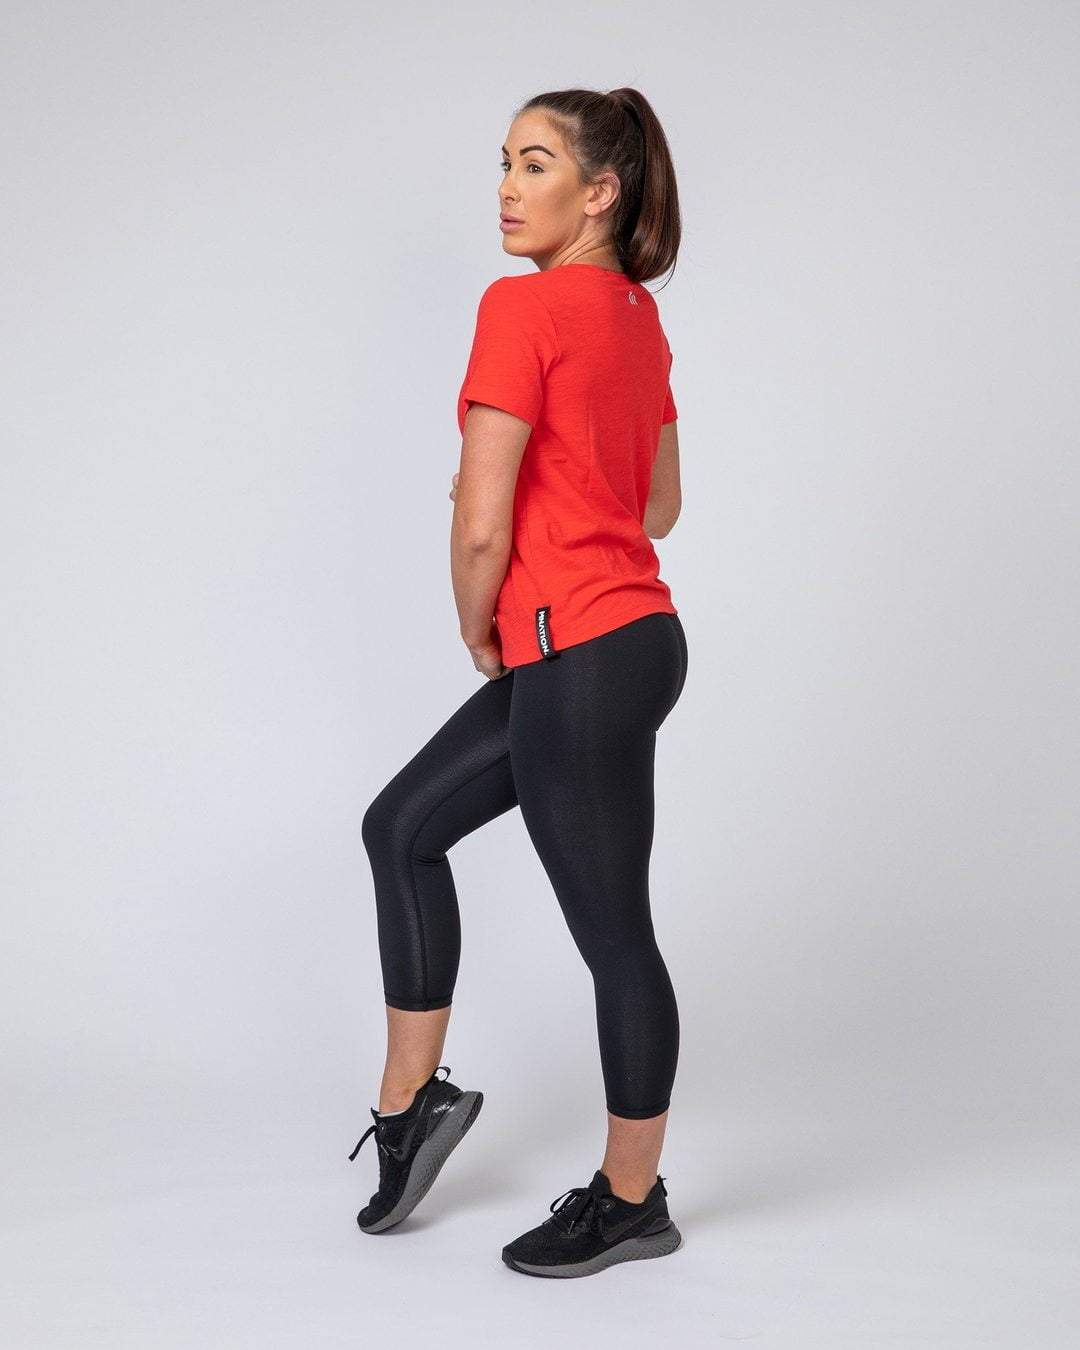 musclenation Classic Womens Tee - Red